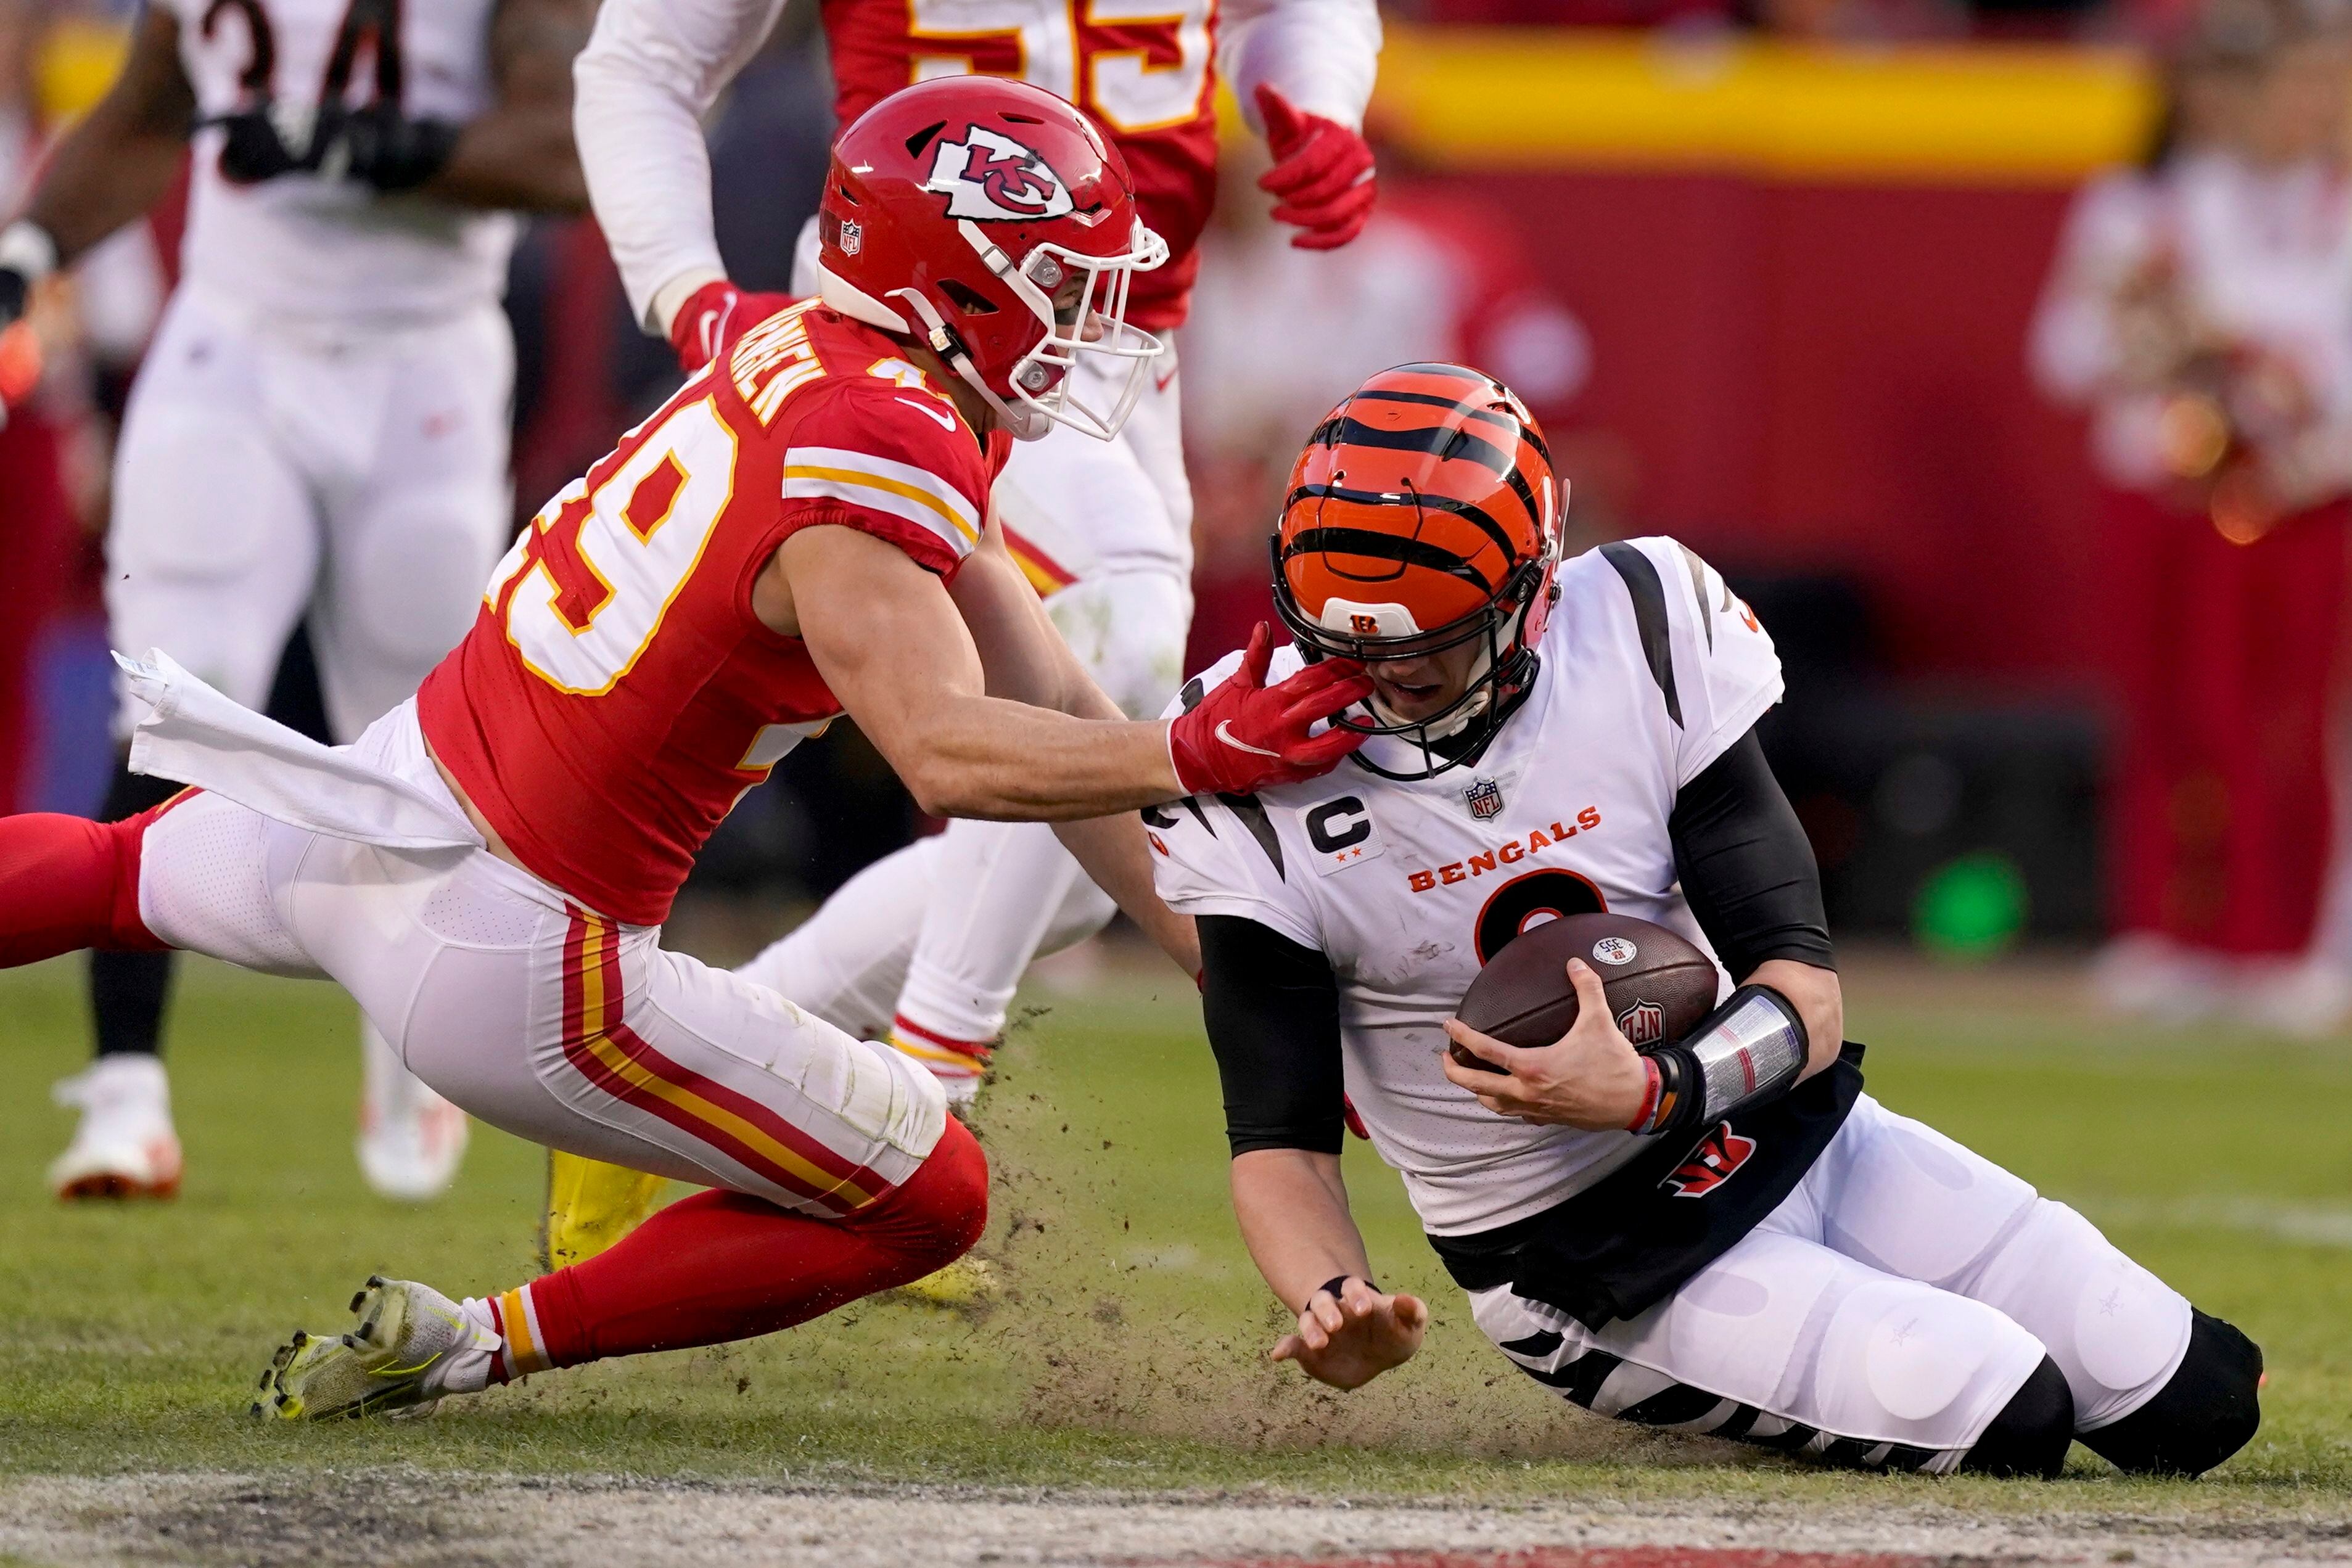 Bengals QB Joe Burrow was on Chiefs DT Chris Jones' mind, and tackling  dummies, during 2022 offseason - A to Z Sports